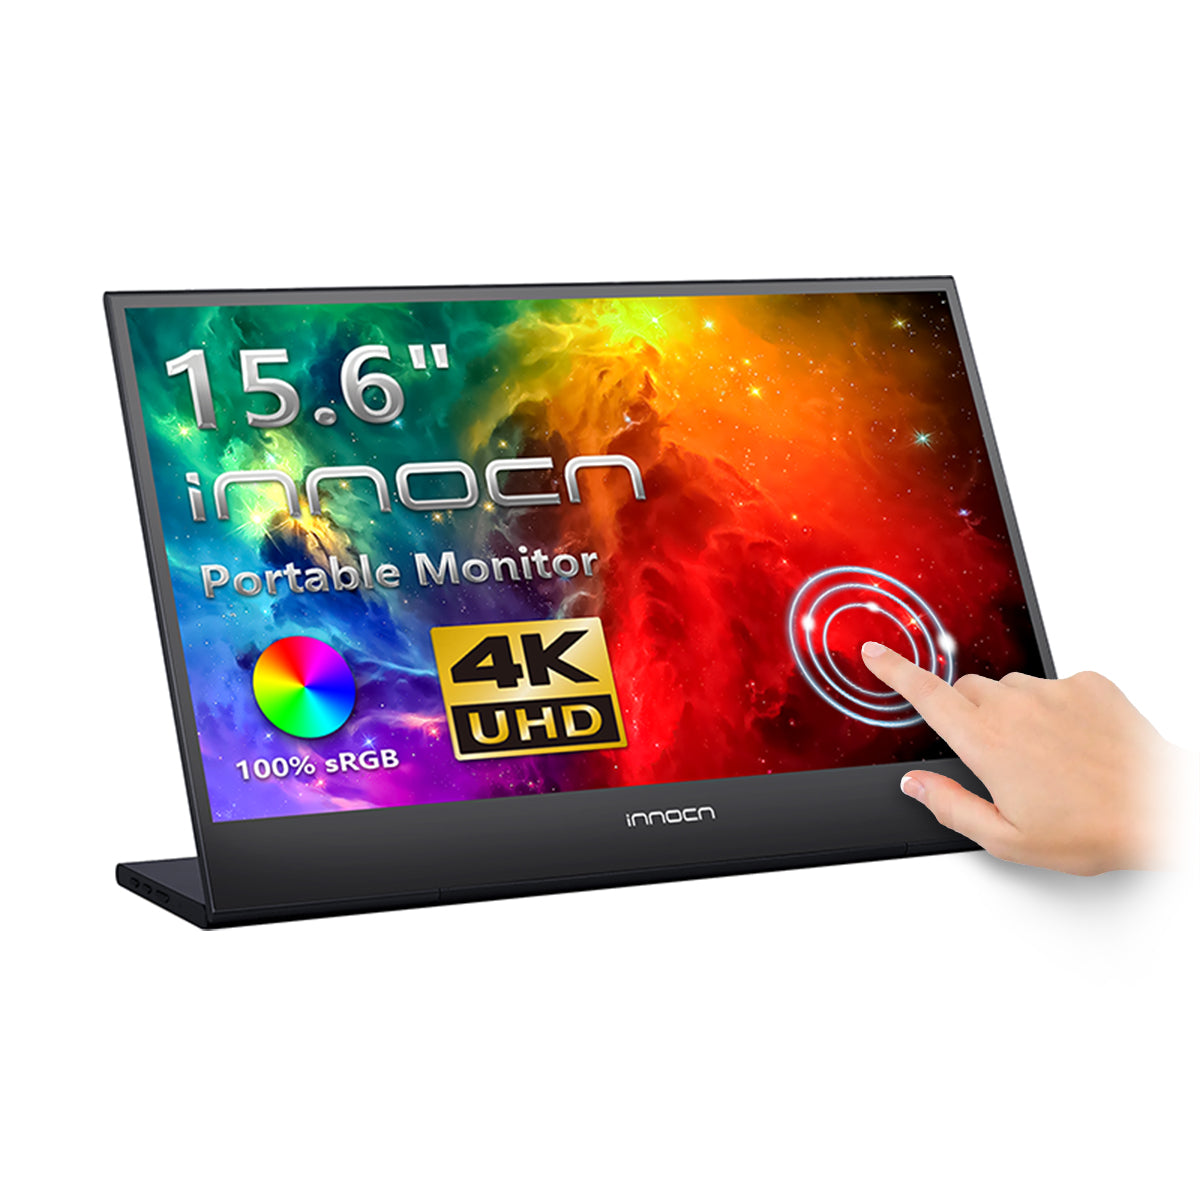 15.6 Portable Monitor - OLED Touch Monitor with Battery by INNOCN - Travel  Second Touch Screen for Photo Editing with 4K, 100% DCI-P3, 100000:1, USB C  External Monitor for Laptop,PC, Phone,Consoles